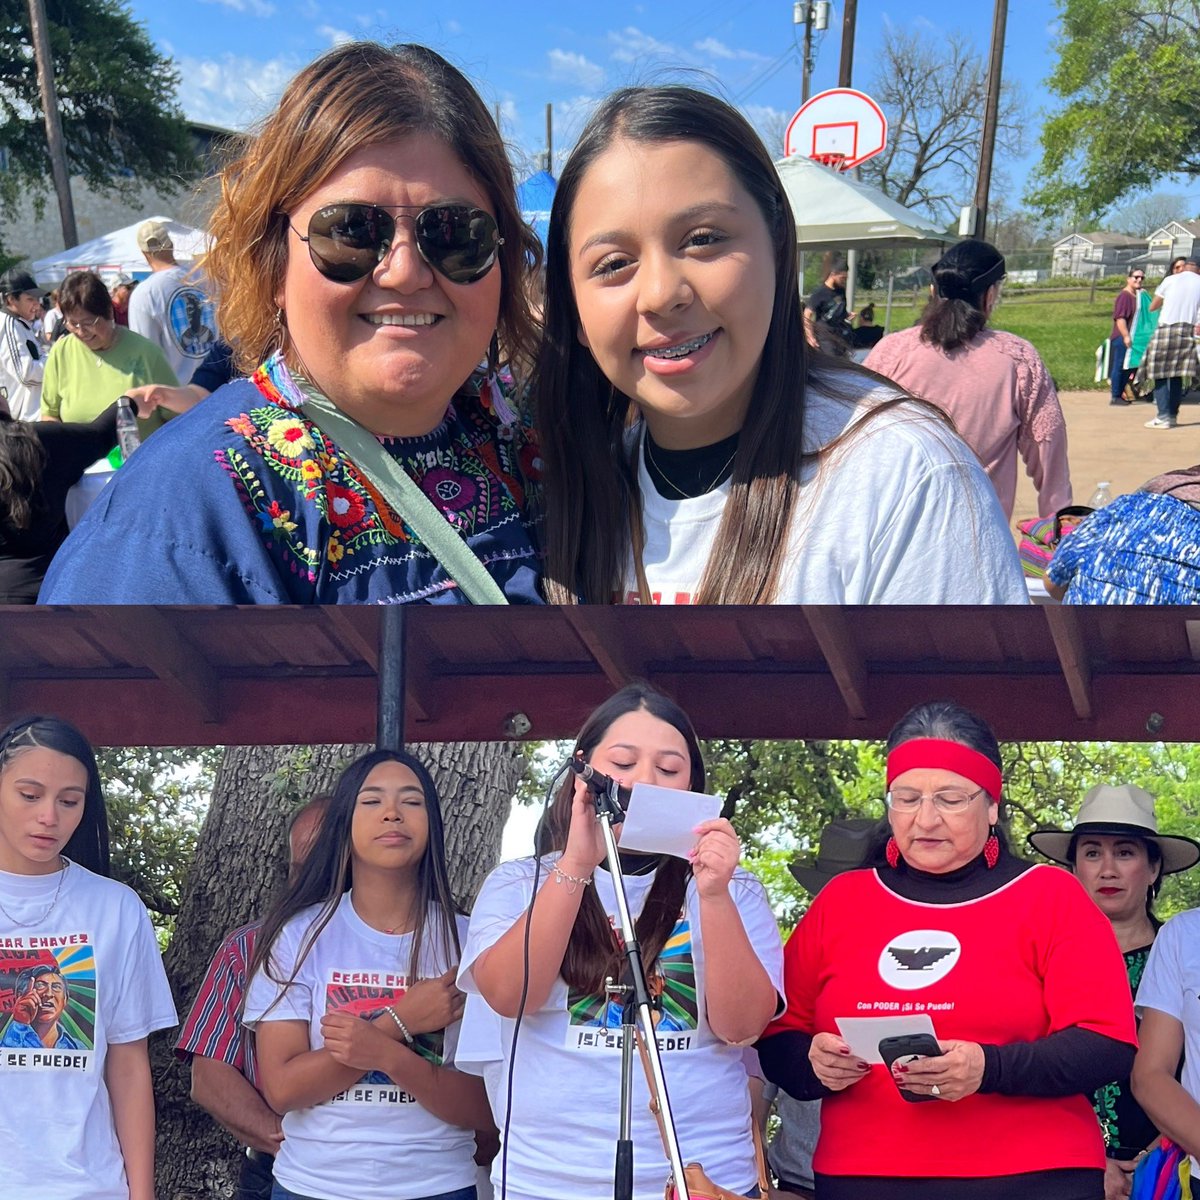 This is a former Houston Eagle! “Once an eagle always an eagle!” I can’t remember the name of the organization she was part of, but I’m so proud of her for being part of this! She remembered me right way too! #AISDproud #AustinISD 🦅 #cesarchavez @JHoustonElem #SiSePuede